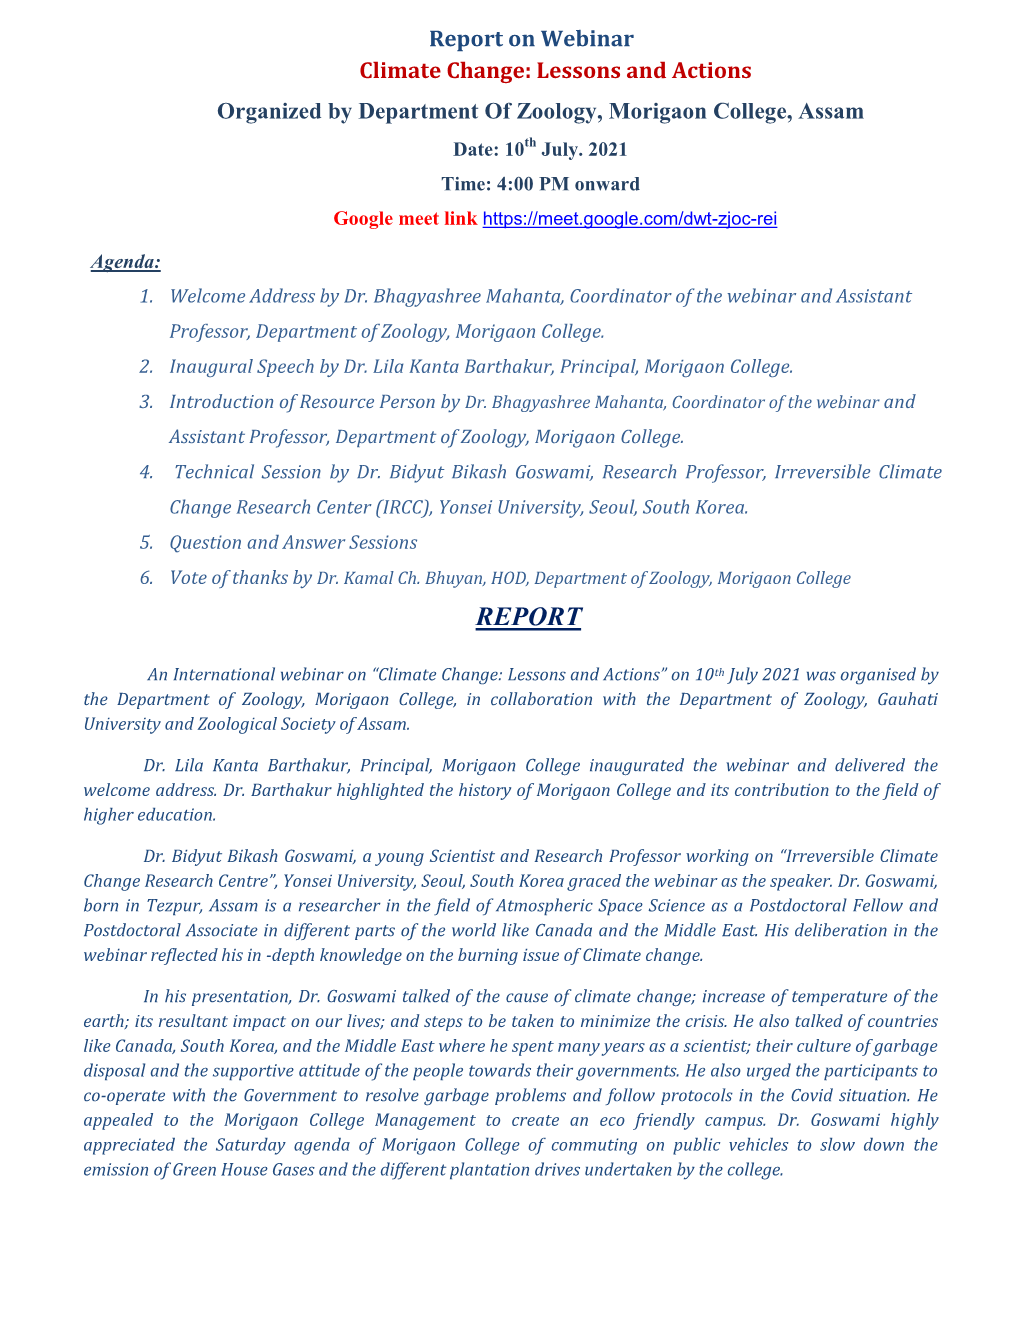 Report on Webinar Climate Change: Lessons and Actions Organized by Department of Zoology, Morigaon College, Assam Date: 10Th July